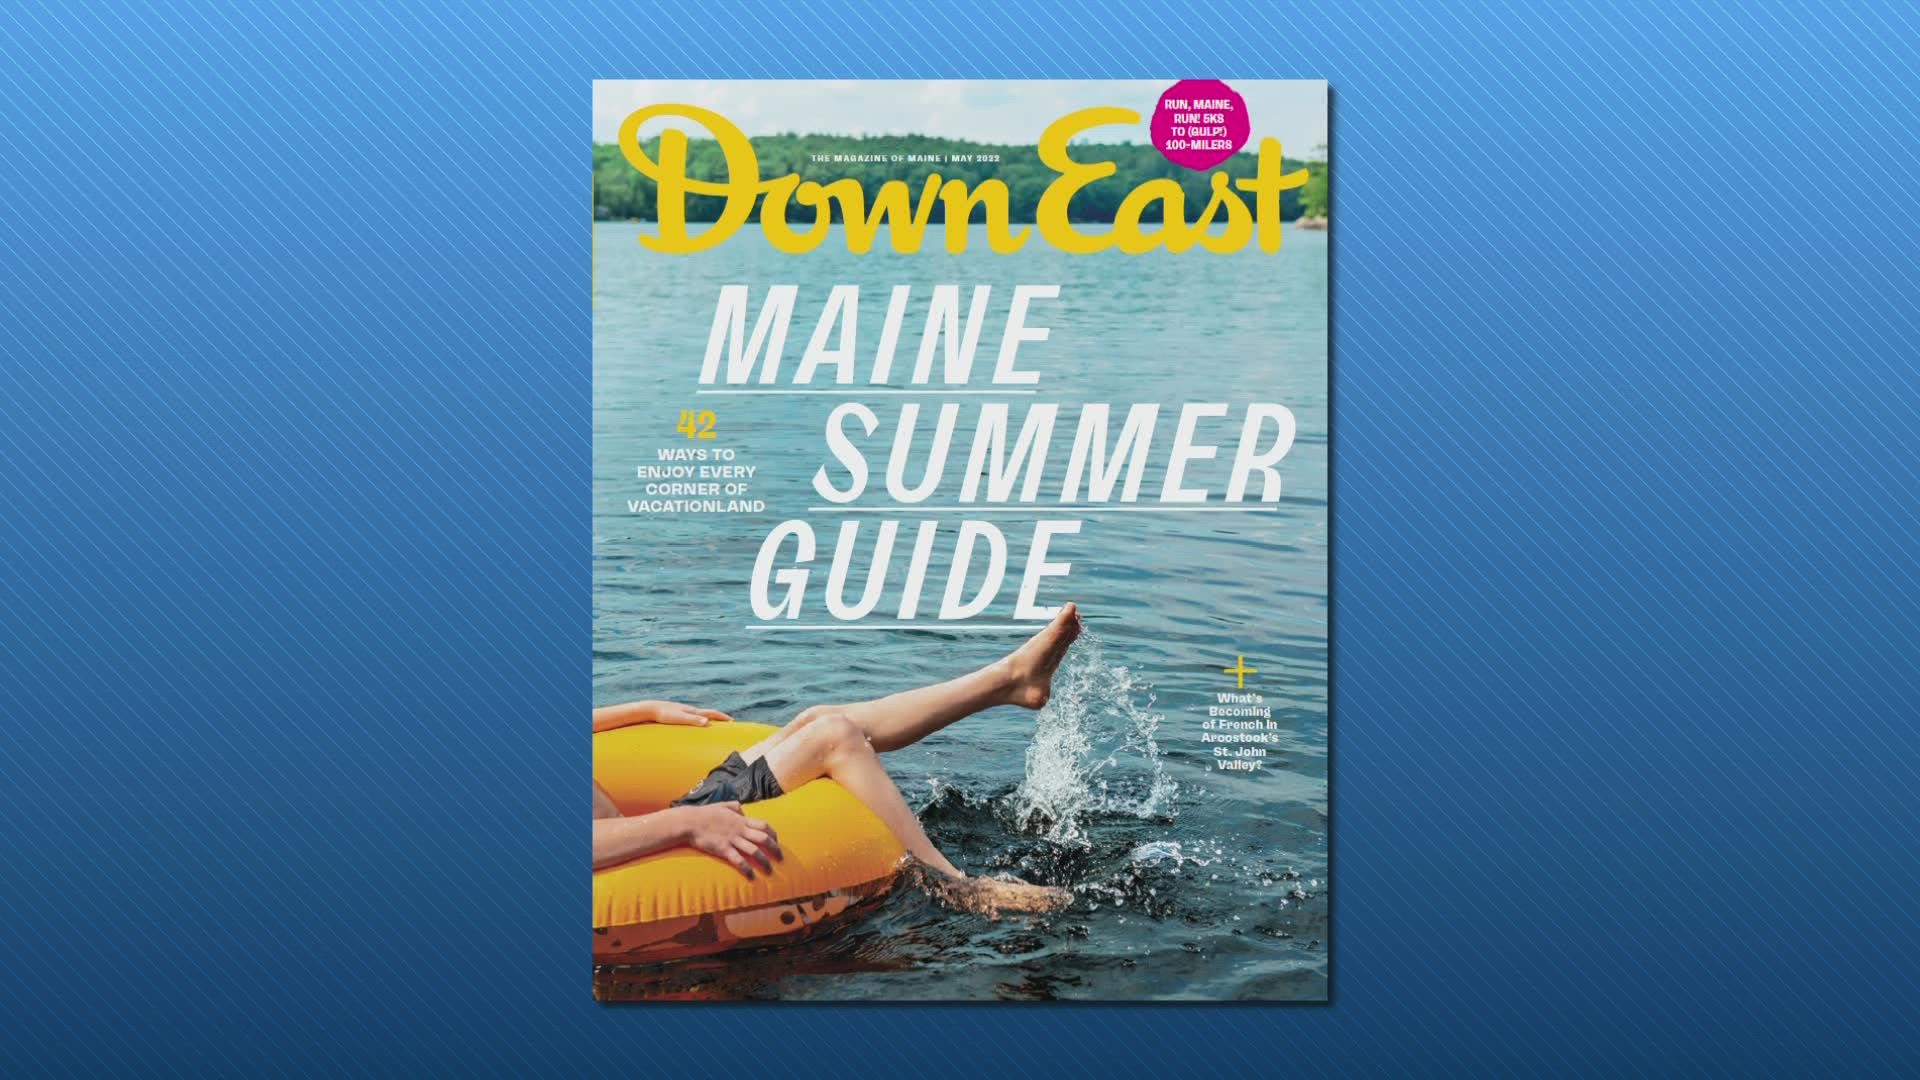 The “Down East” summer guide offers “42 ways to enjoy every corner of Vacationland”